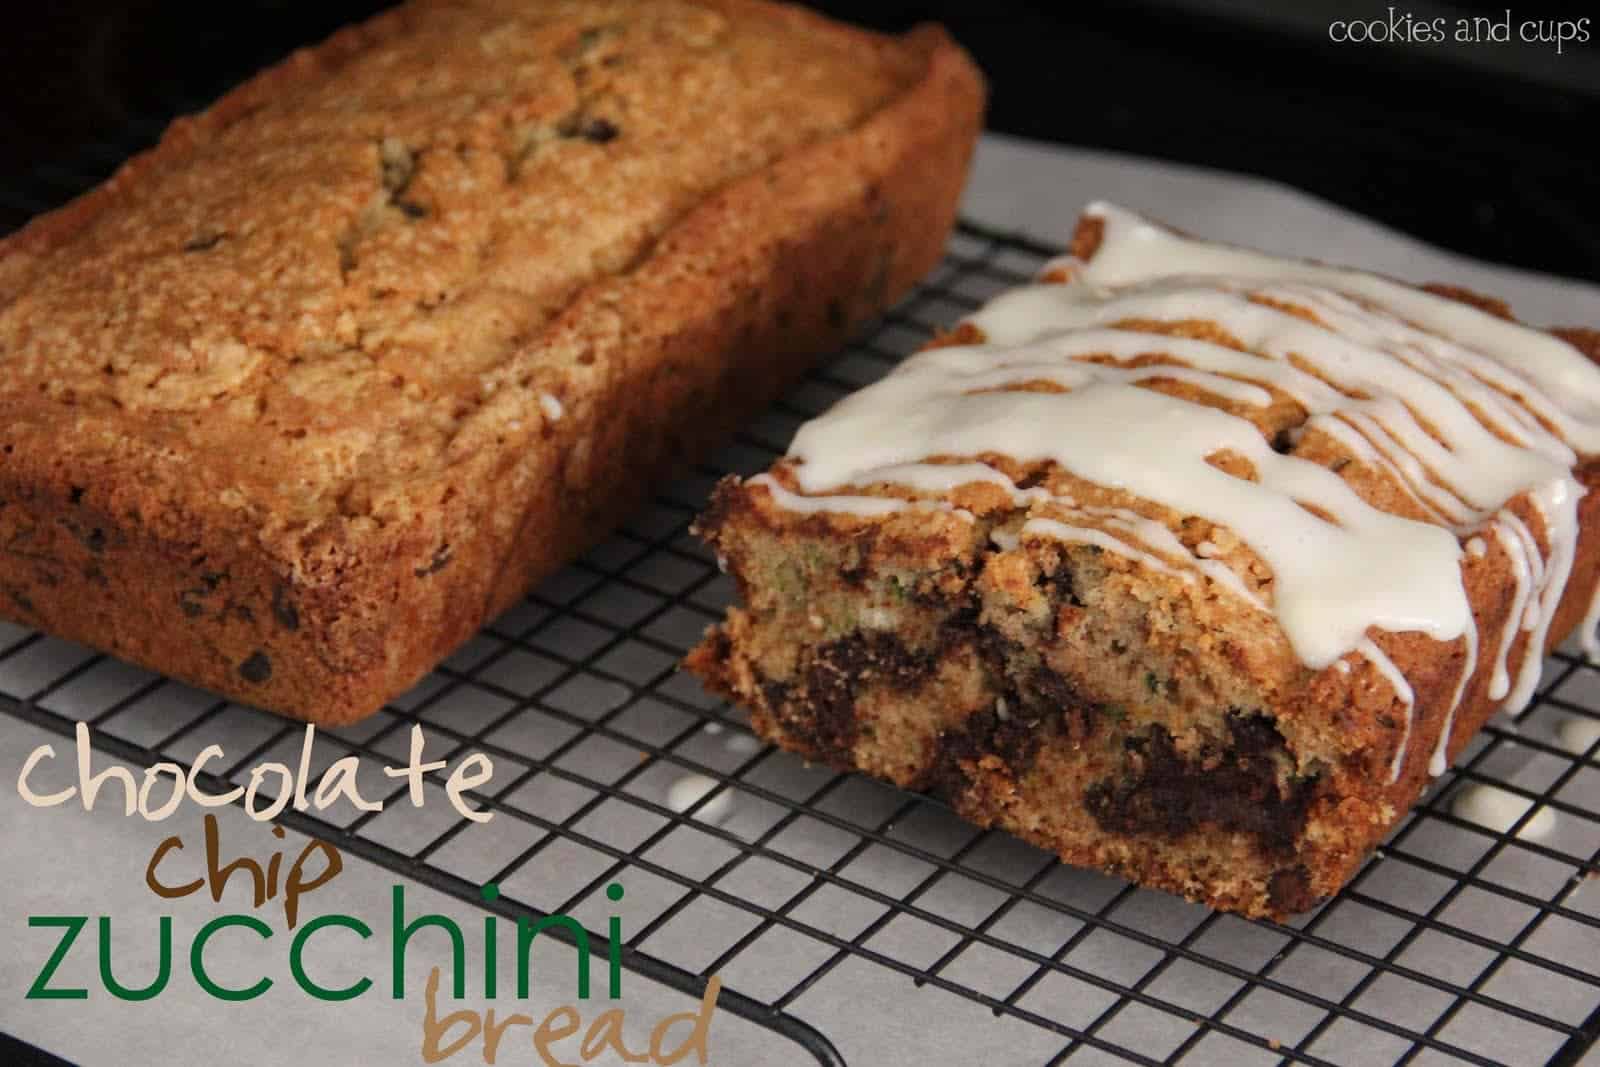 Two loaves of chocolate chip zucchini bread on a cooling rack